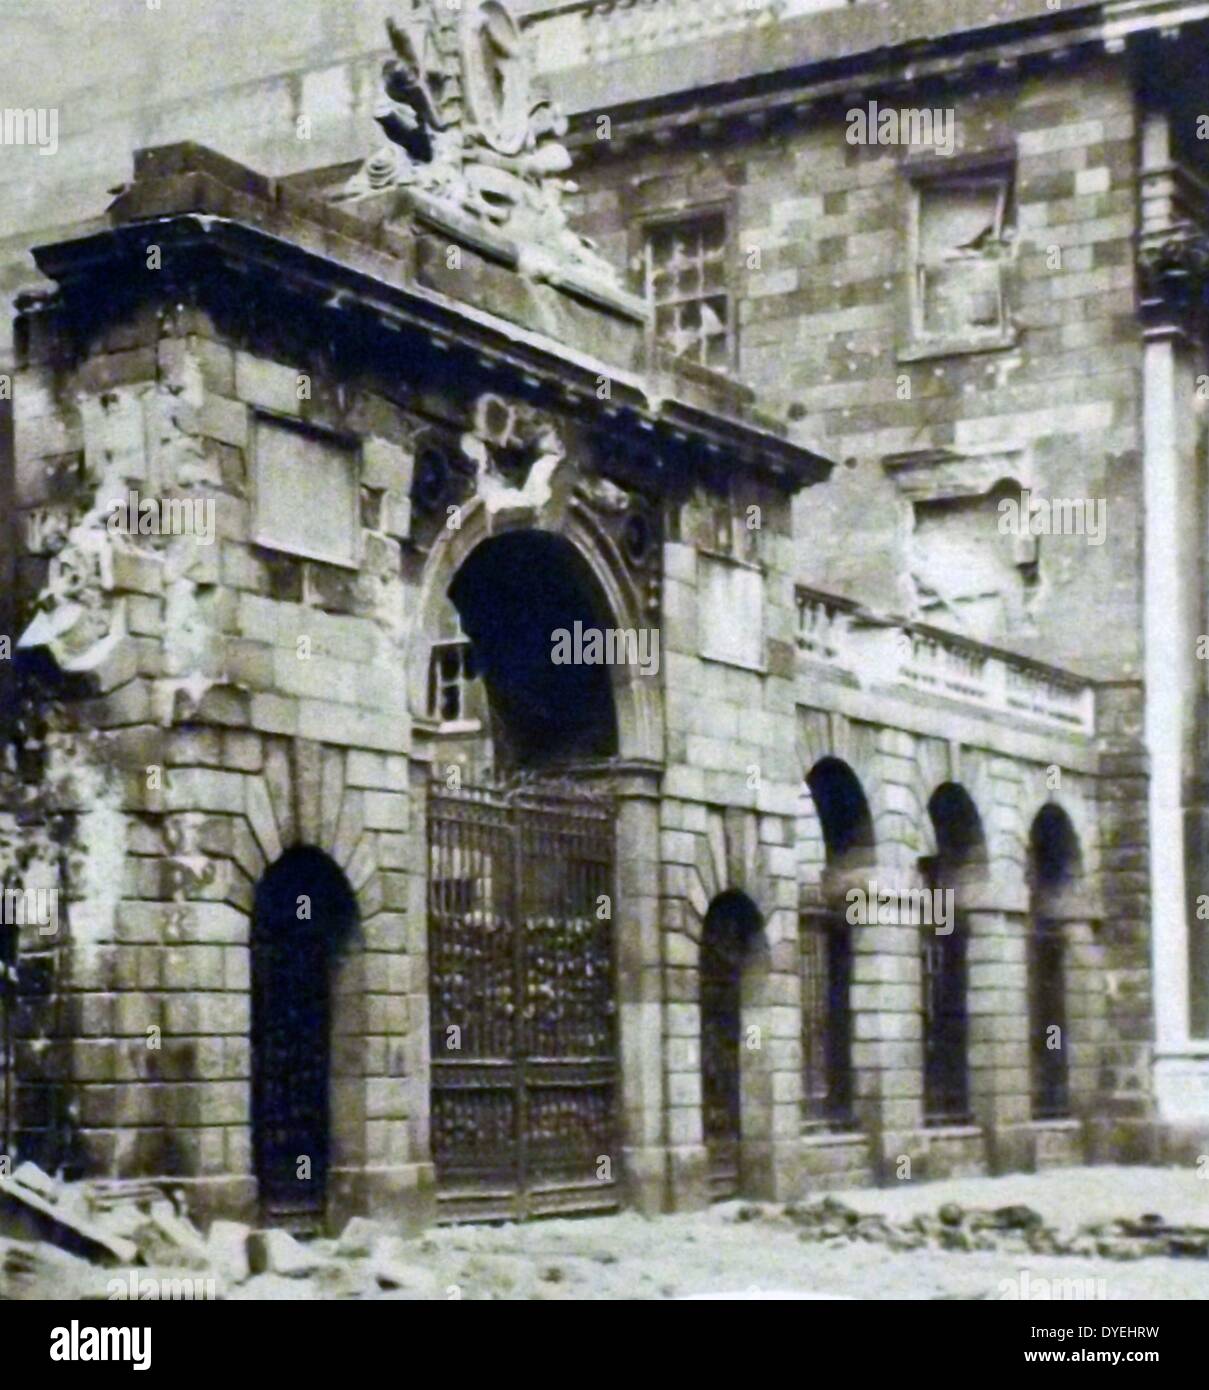 Destruction at the the Four Courts, during The Easter Rising also known as the Easter Rebellion, was an armed insurrection staged in Ireland during Easter Week, 1916. The Rising was mounted by Irish republicans with the aims of ending British rule in Ireland and establishing an independent Irish Republic. Early on Monday morning, 24 April 1916, roughly 1,200 Volunteers and Citizen Army members took over strongpoints in Dublin city centre. Stock Photo